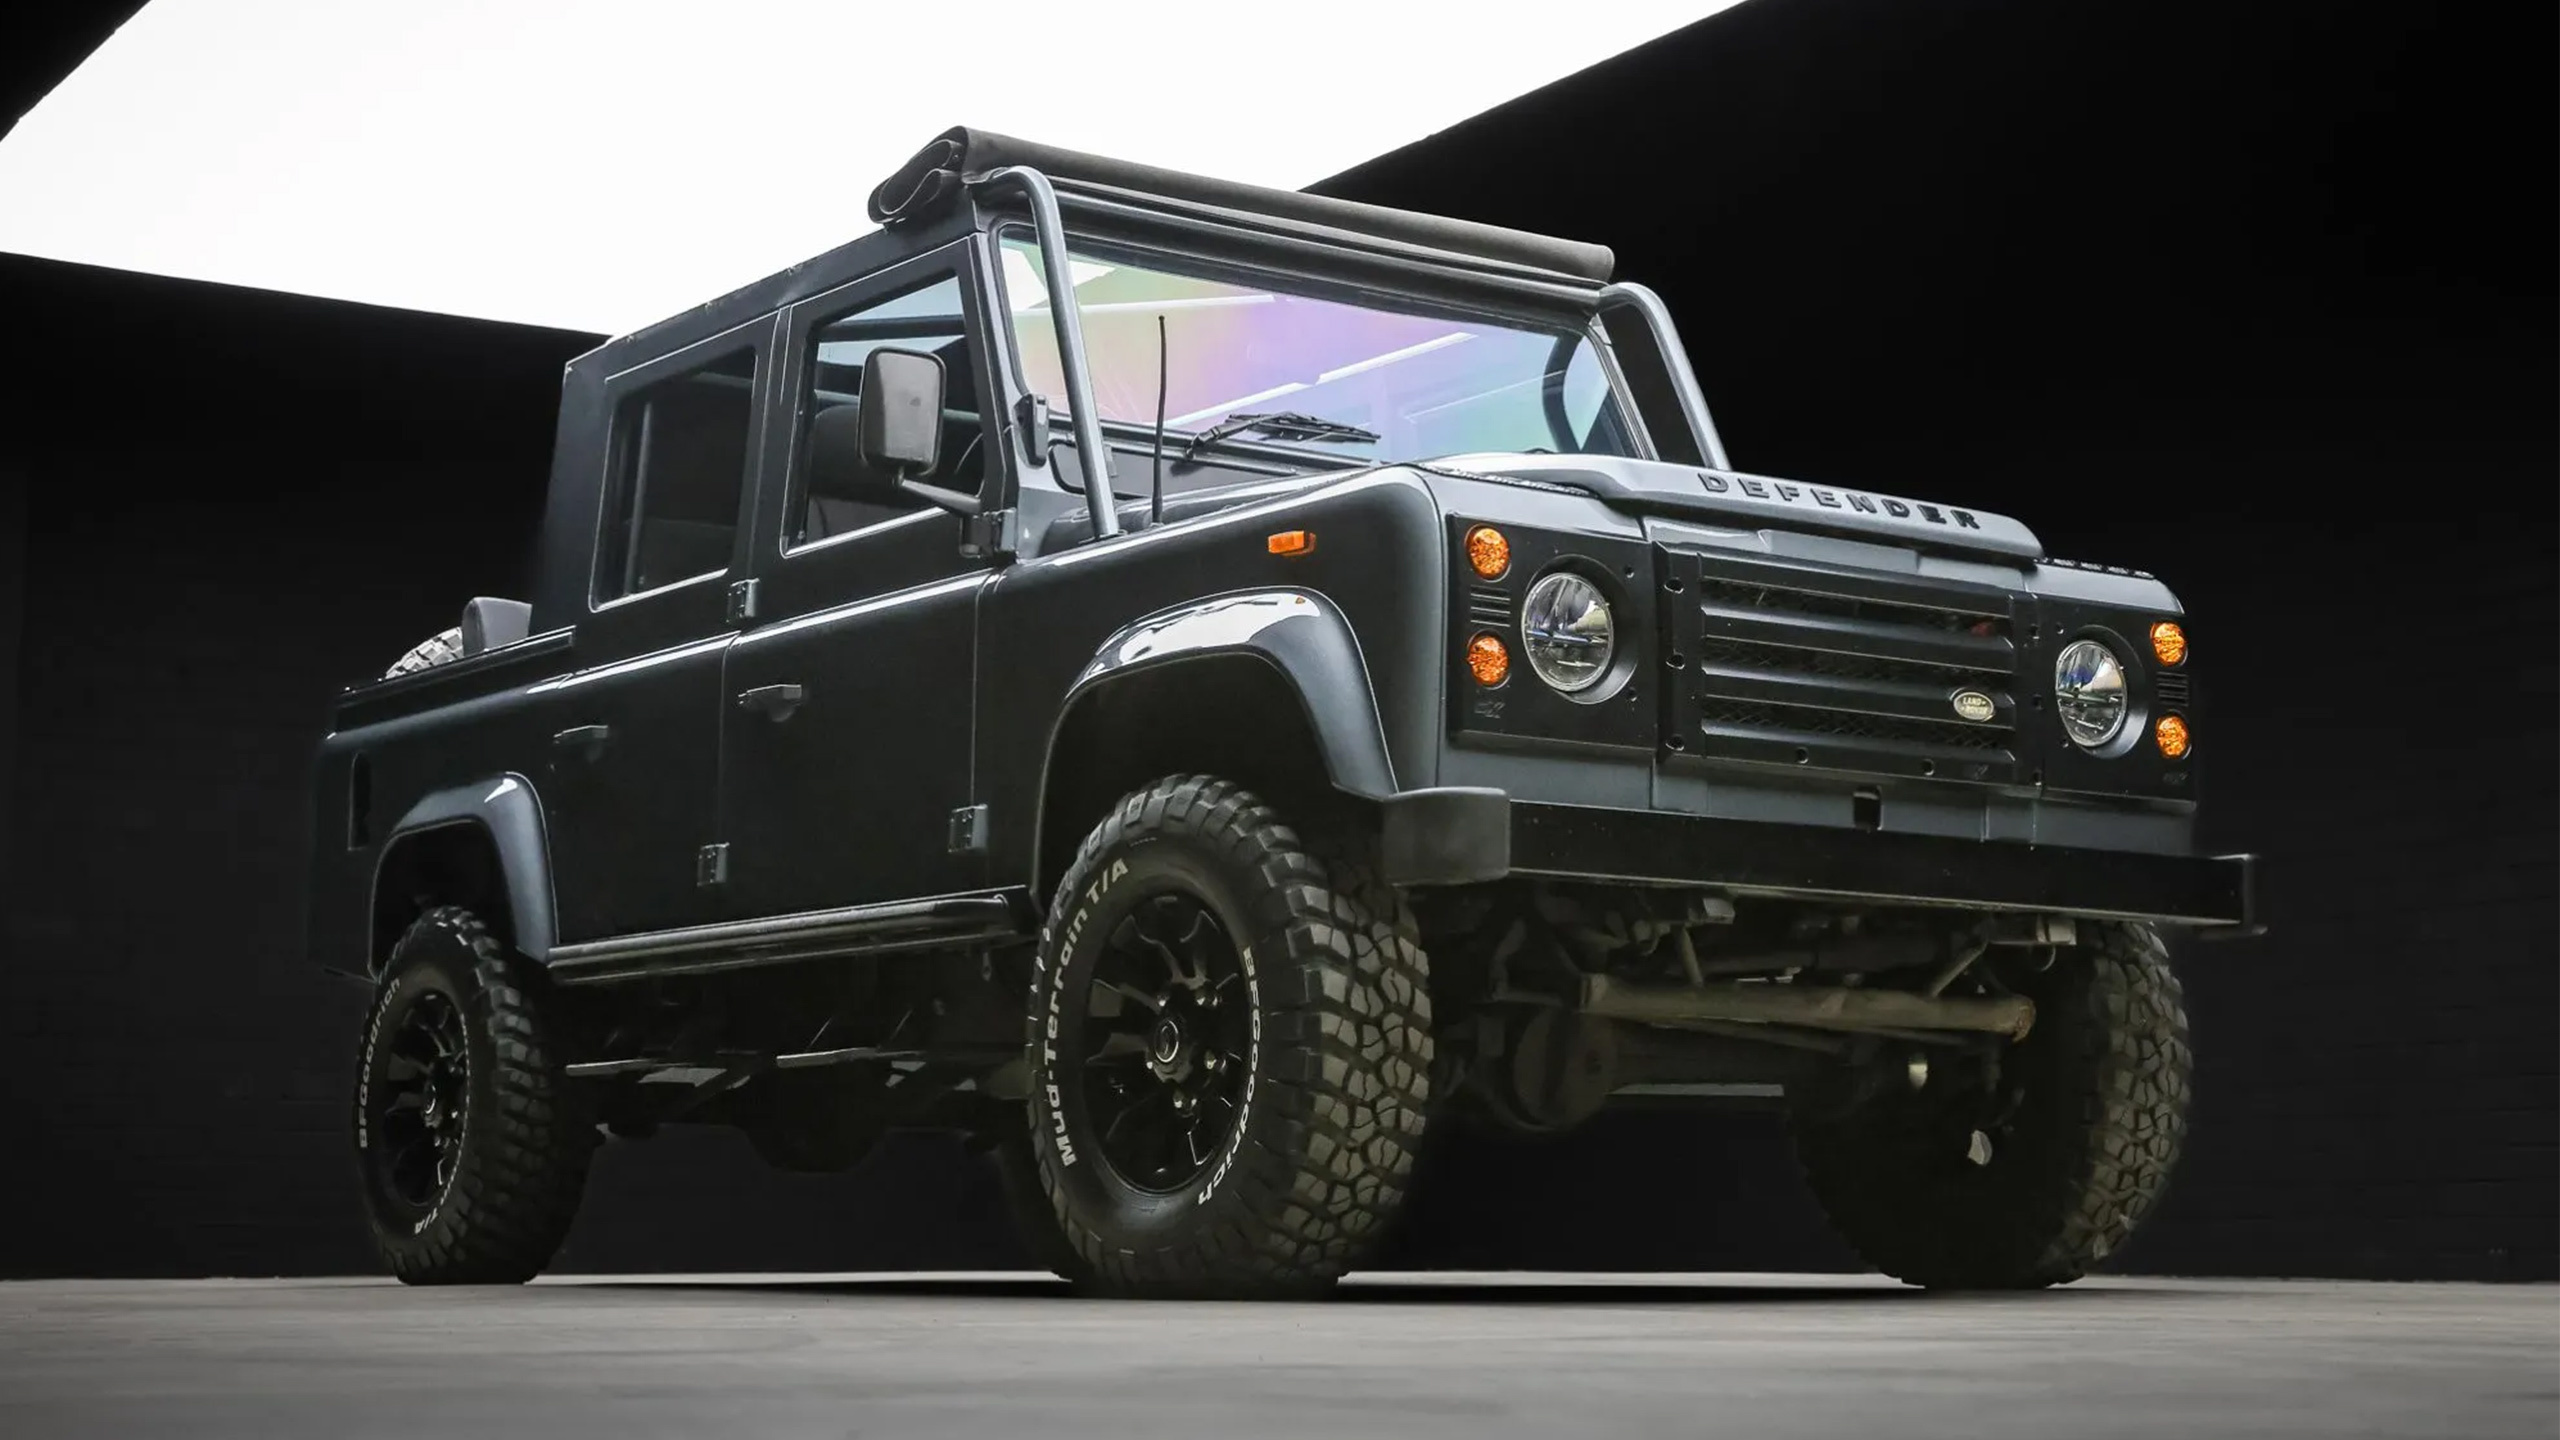 When Did the Land Rover Defender Come Out?